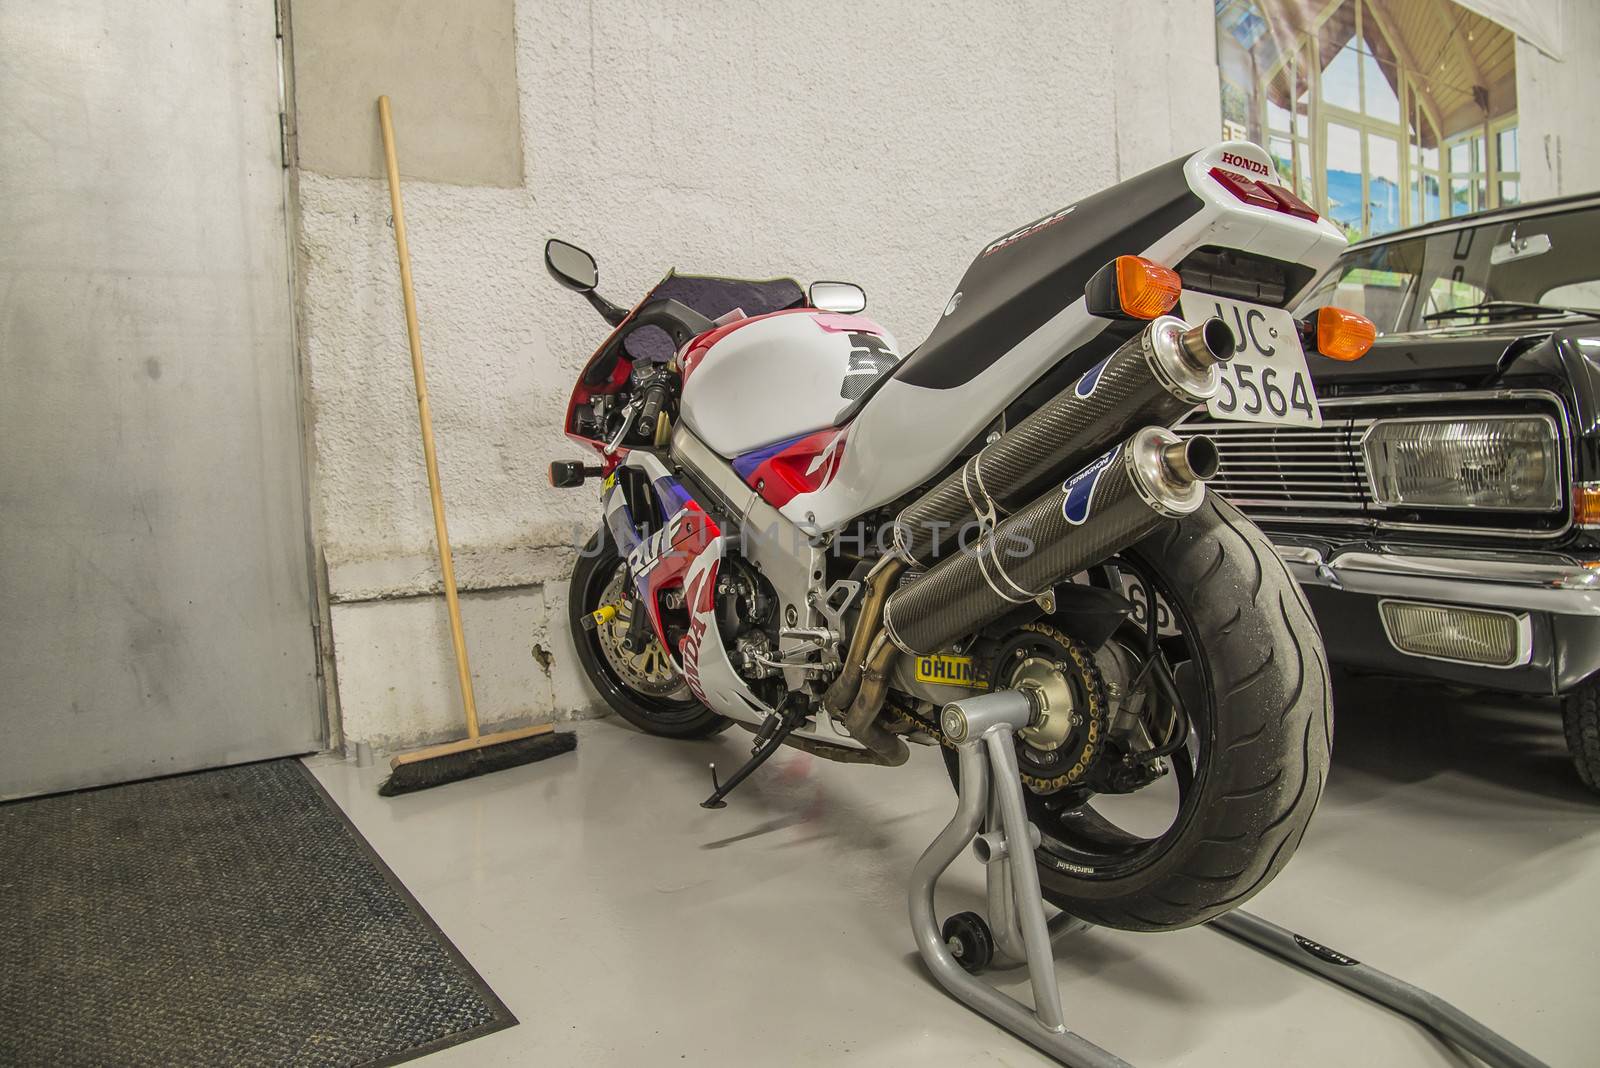 racing motorcycles in a garage by steirus